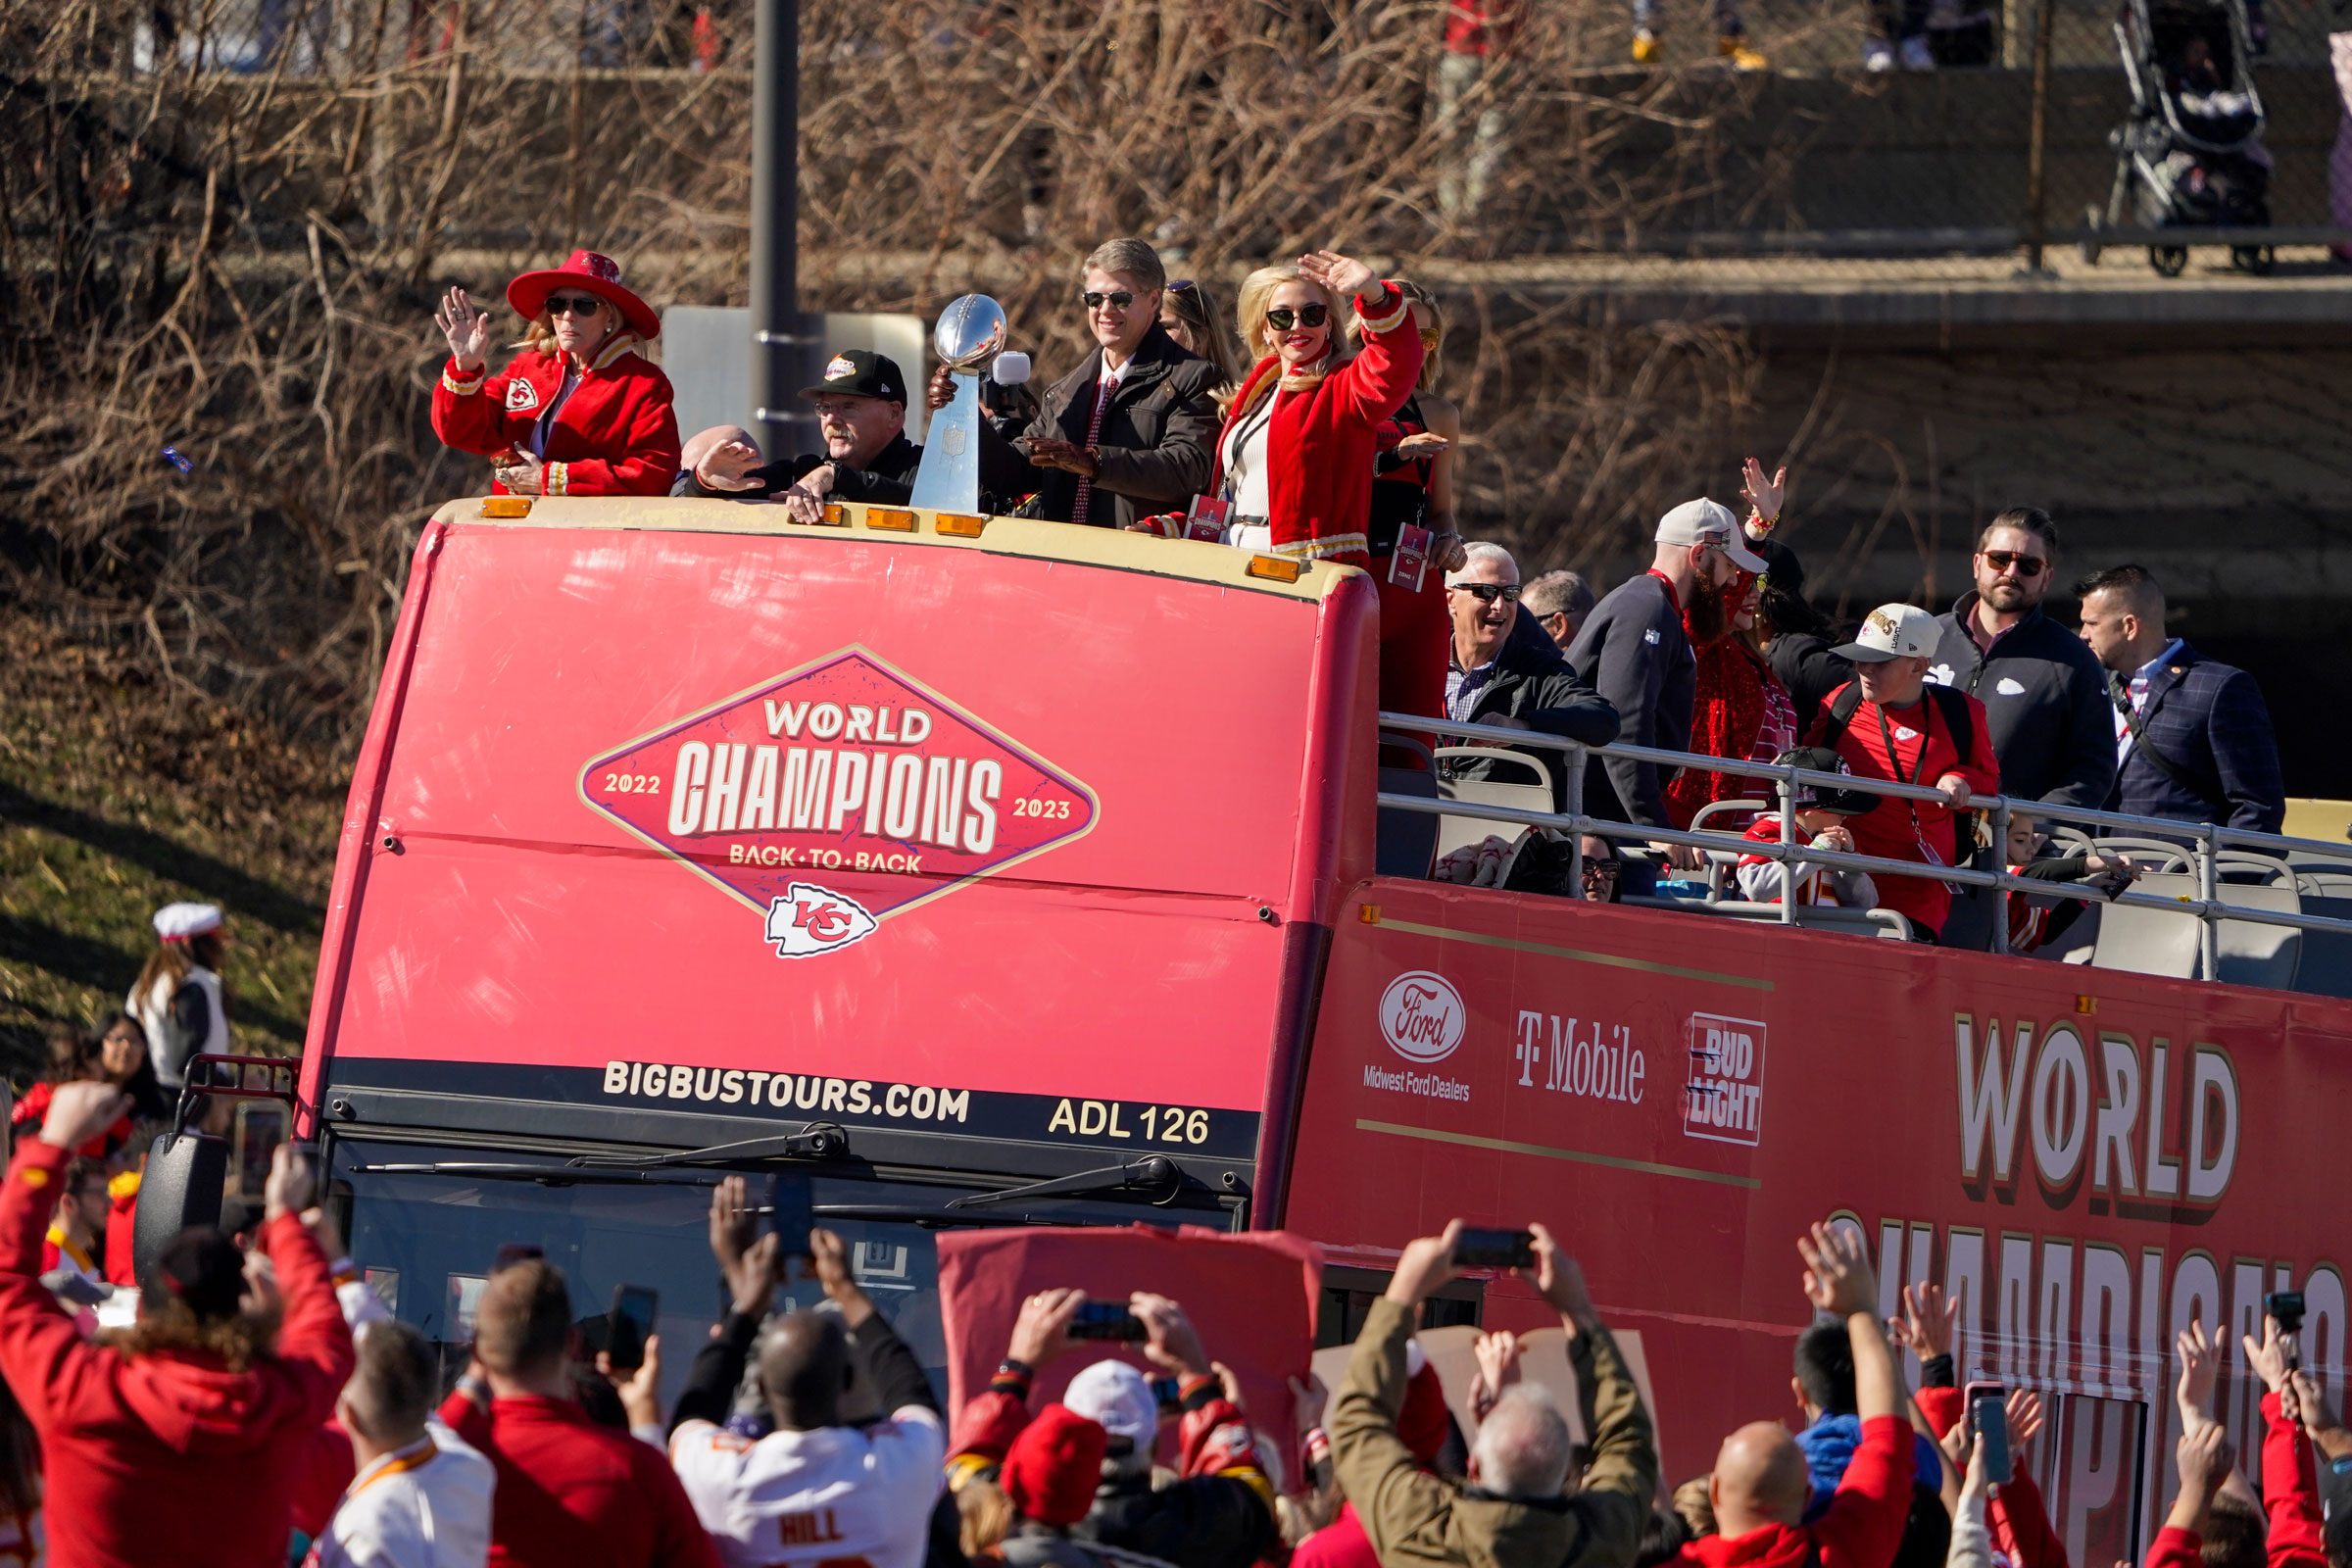 The Kansas City Chiefs owner Clark Hunt and coach Andy Reid celebrate during the Super Bowl victory parade.